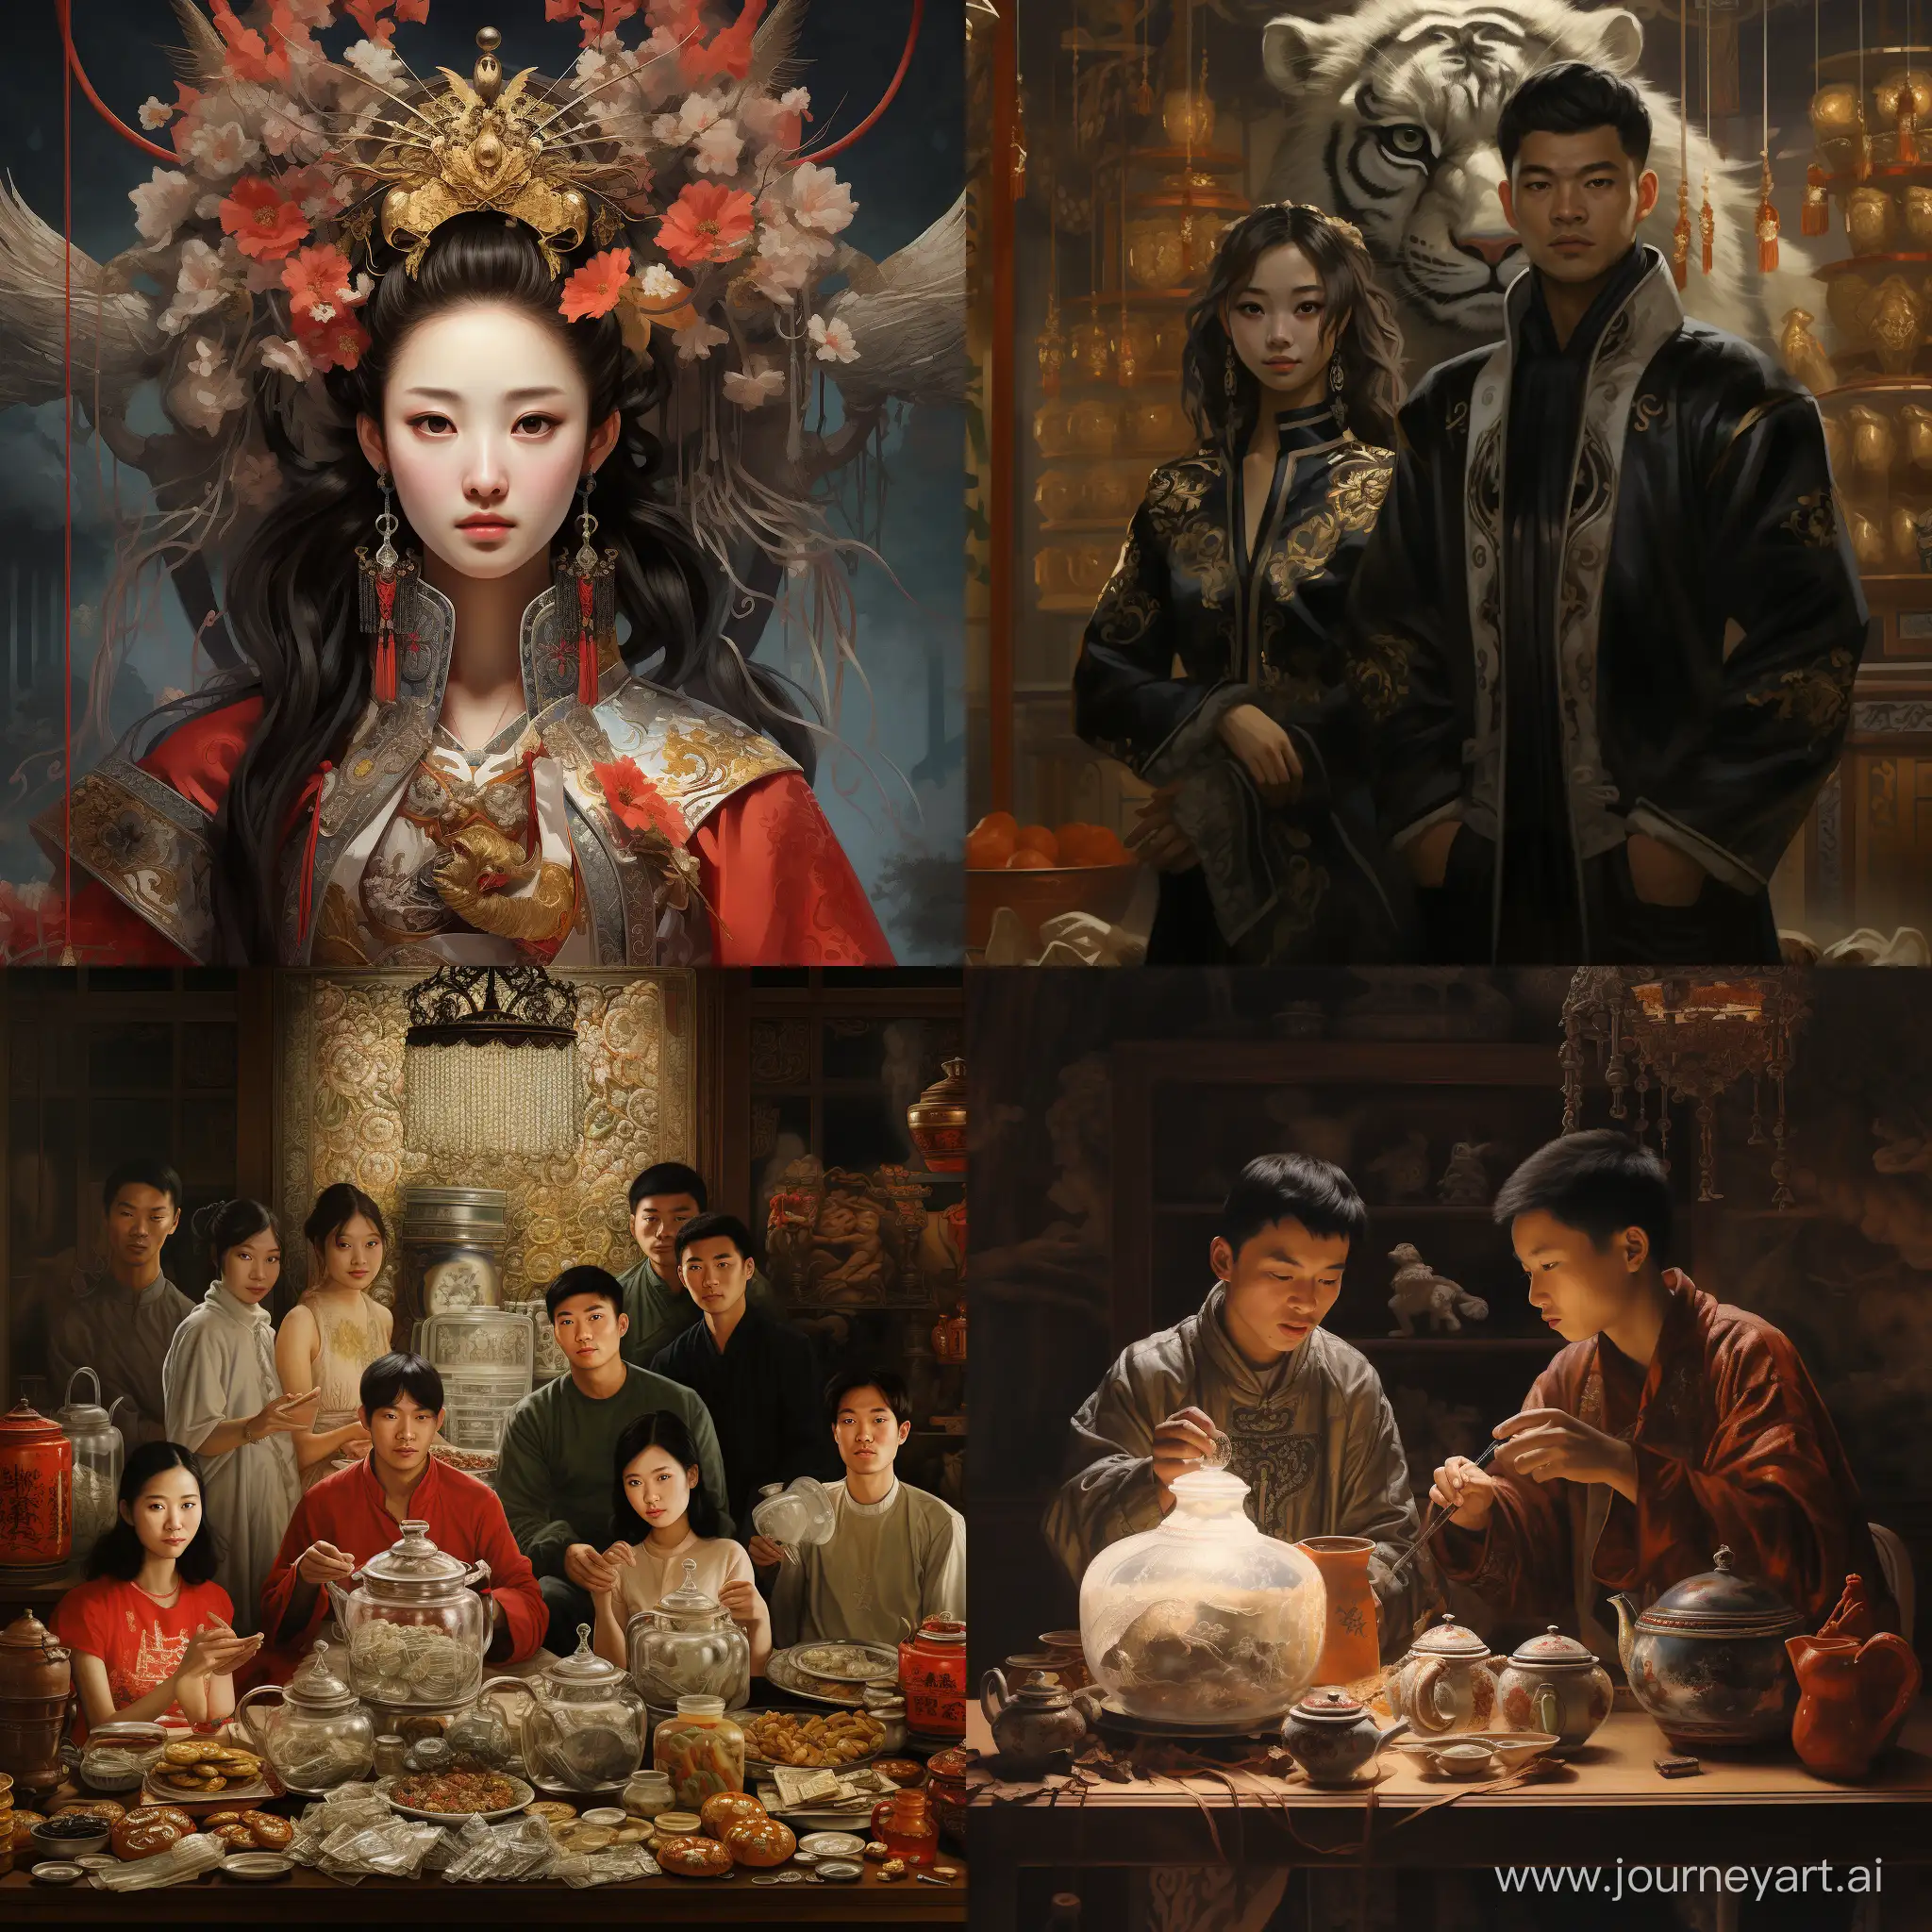 Chinese-Holders-Art-Unique-11-Aspect-Ratio-Composition-Cultural-Harmony-and-Minimalist-Aesthetics